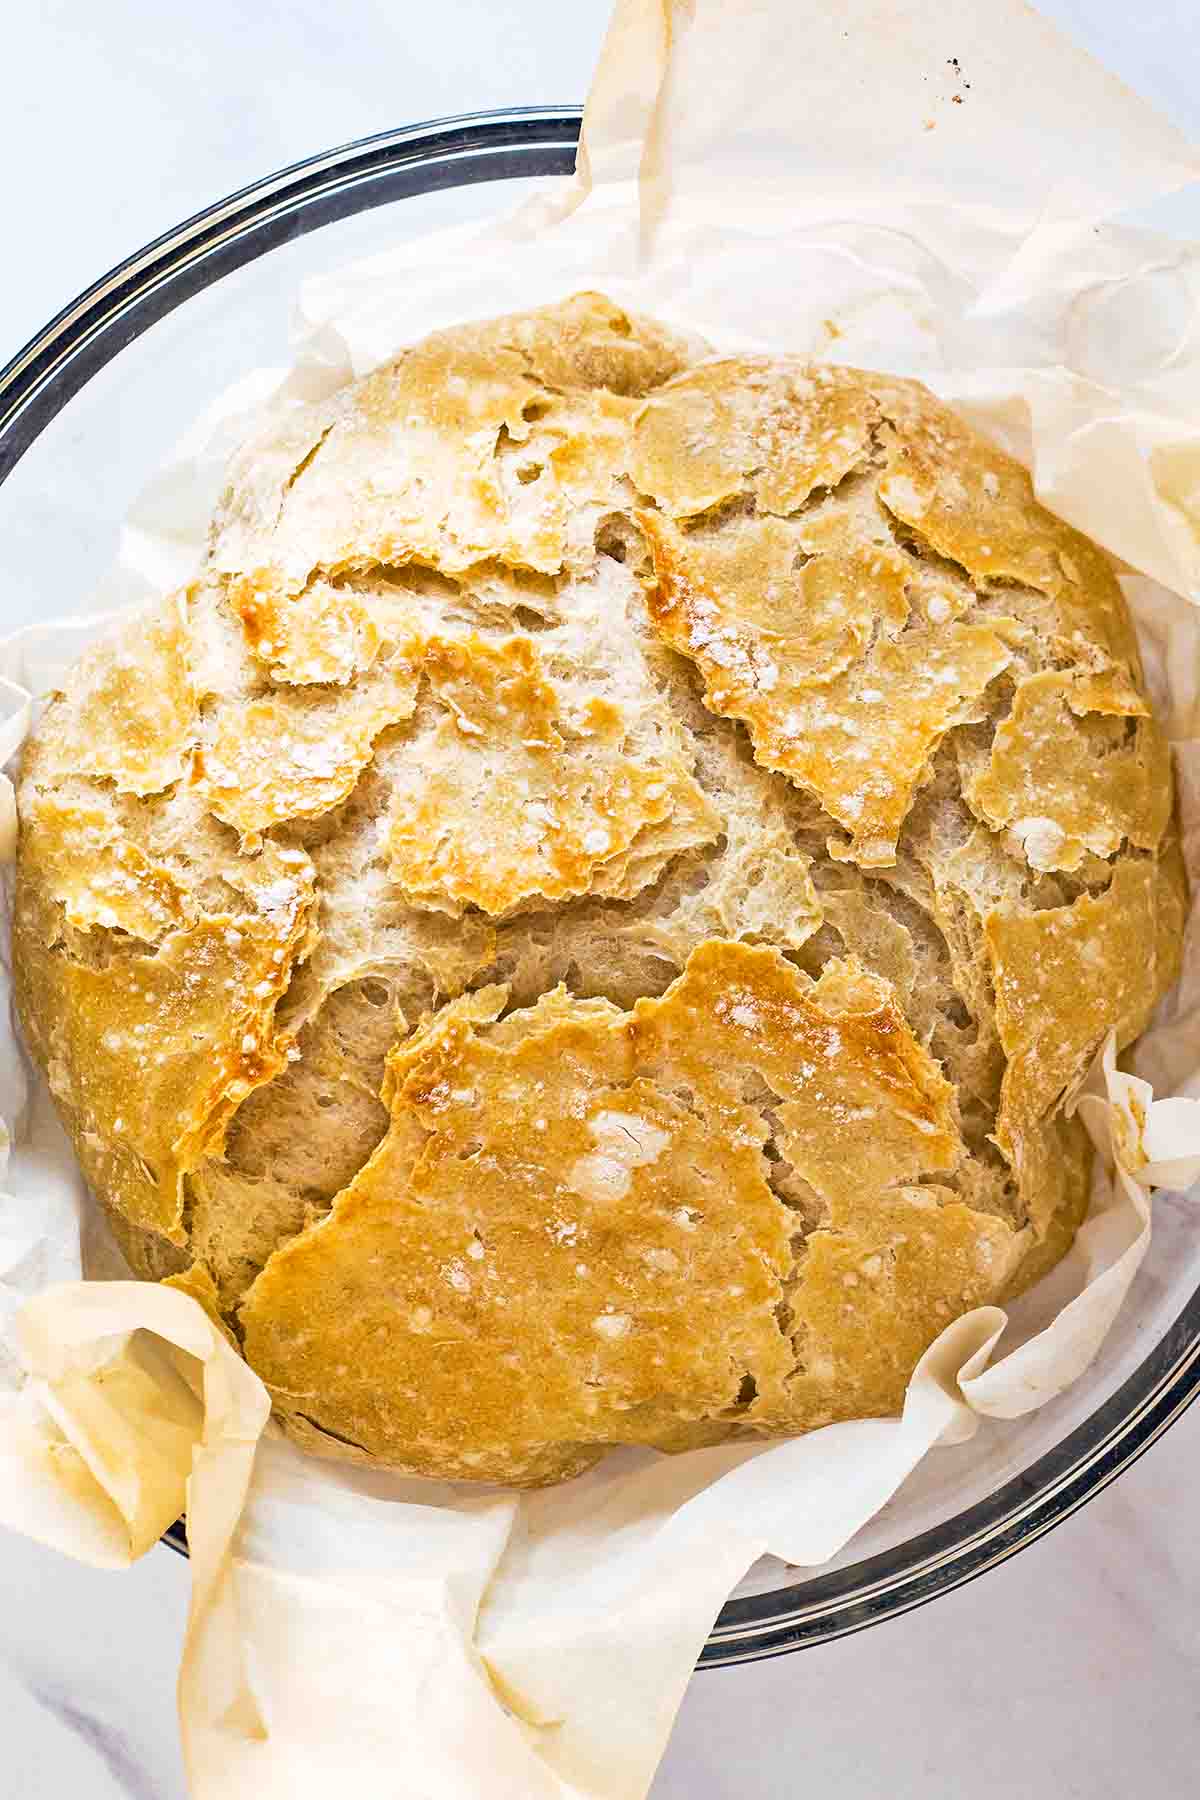 Overnight no knead bread in parchment lined glass bowl